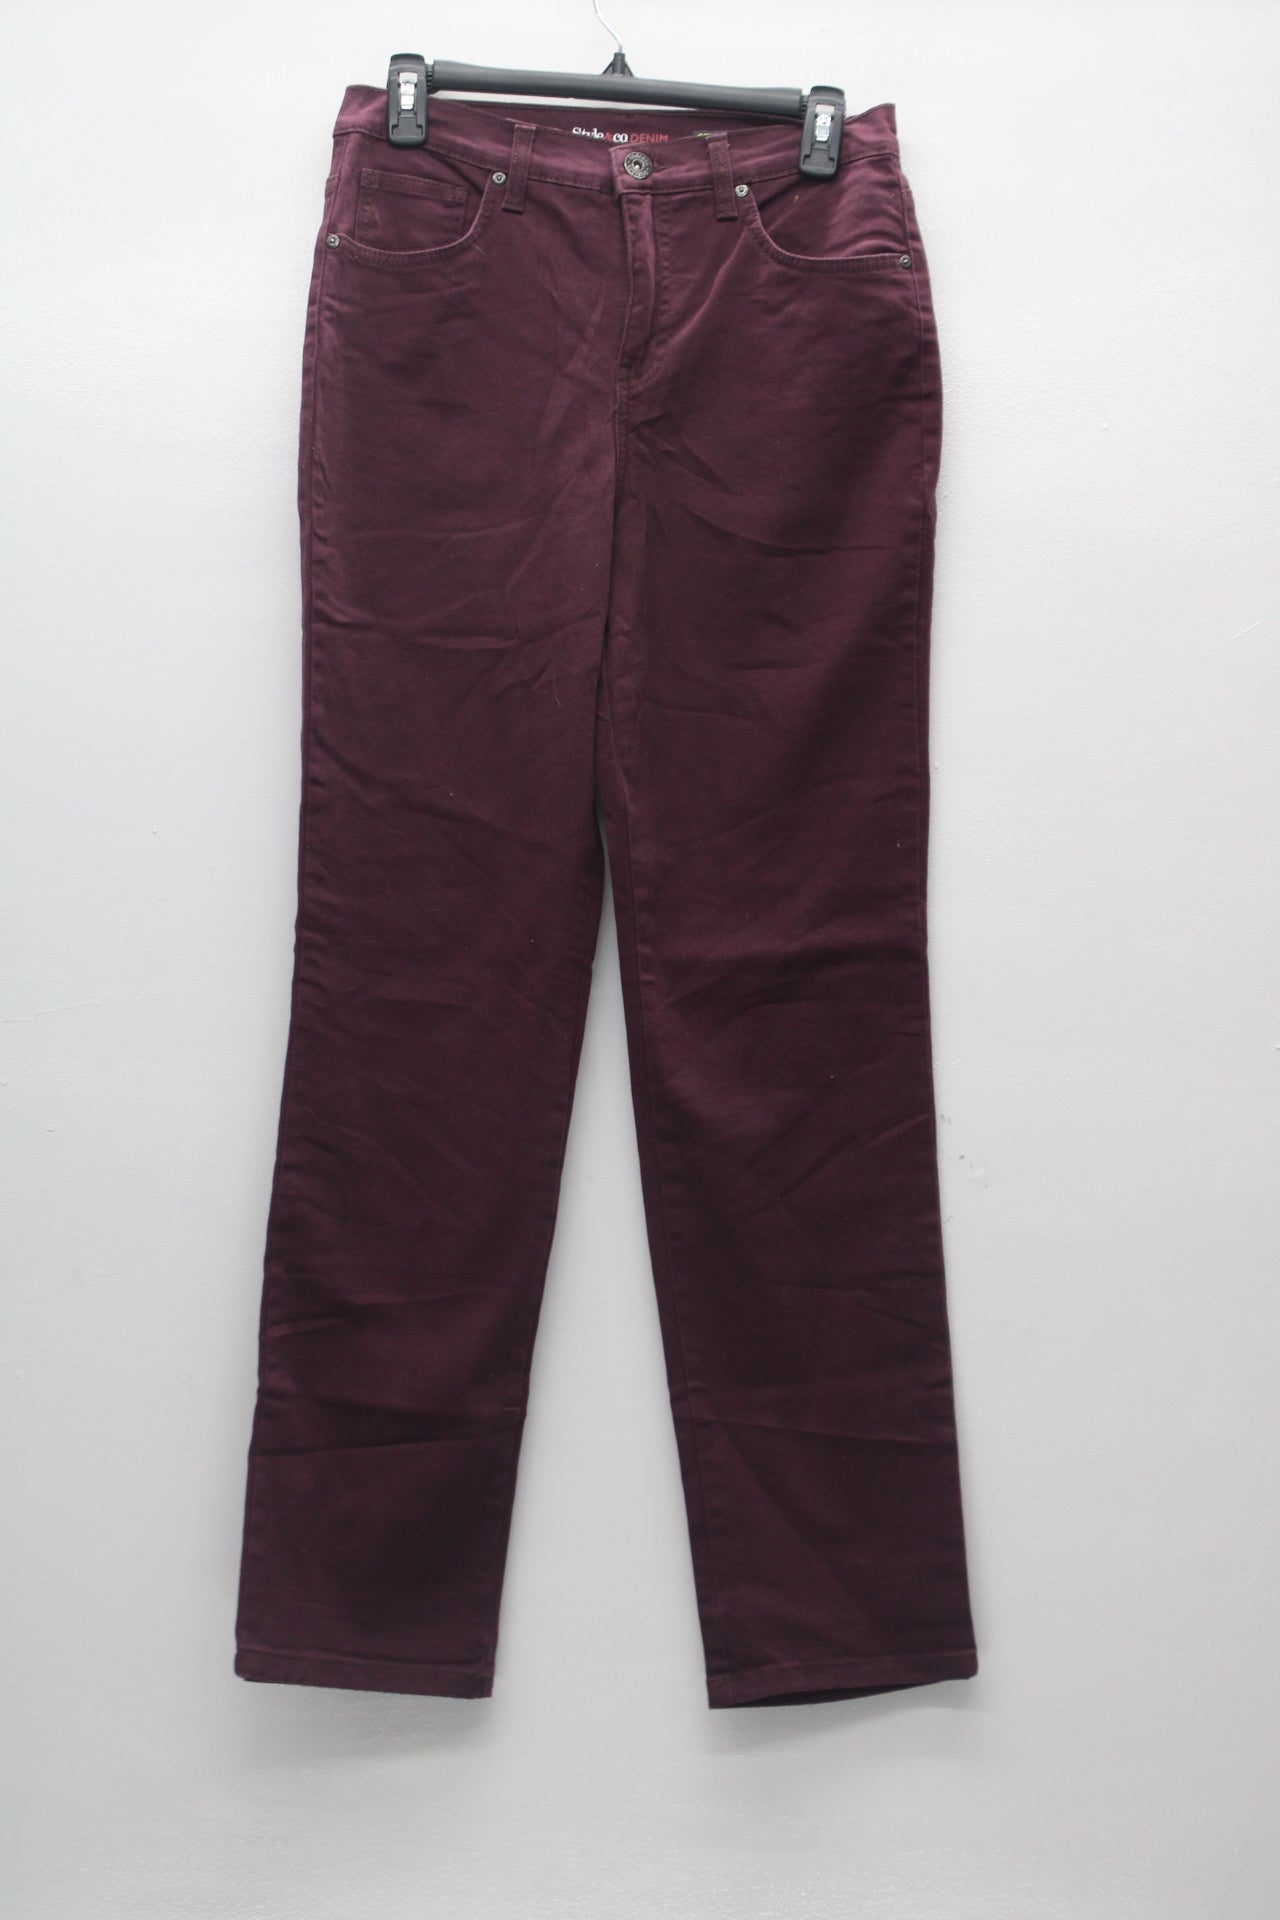 Style & Co Women's Jeans Straight Leg Maroon 4 Pre-Owned